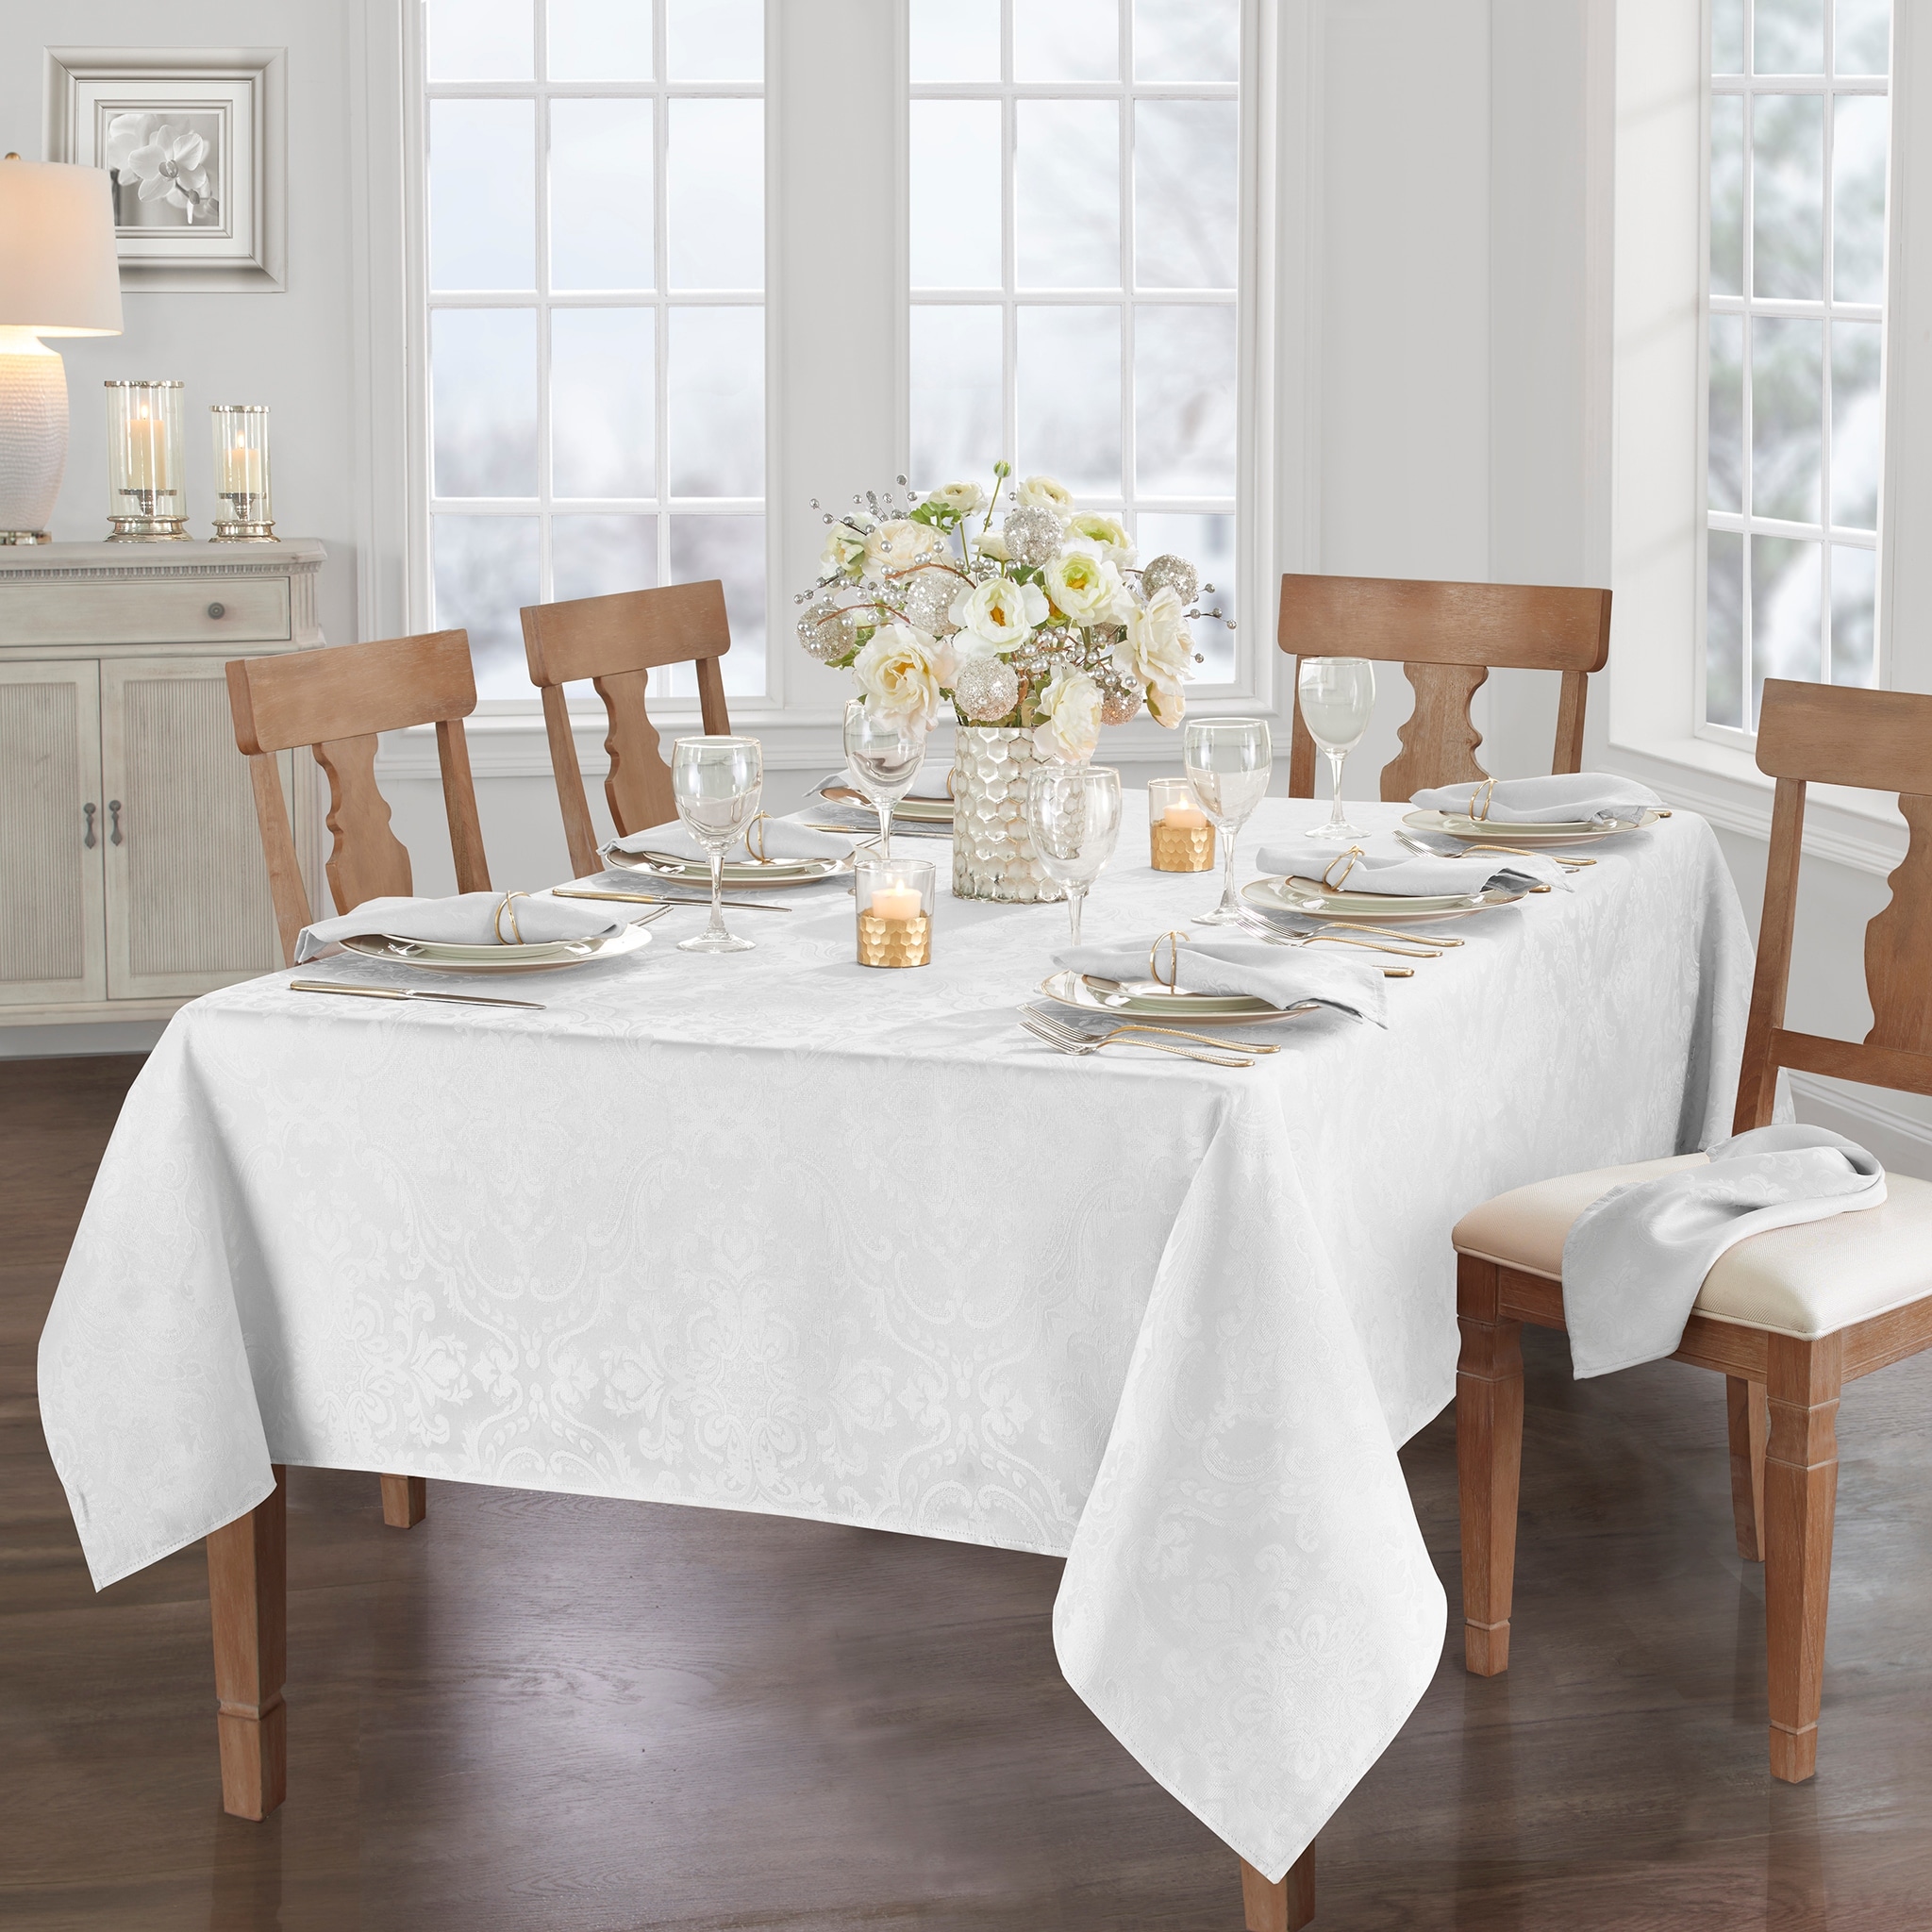 https://ak1.ostkcdn.com/images/products/is/images/direct/7c0027010540b2485d4f439370d4c248eb1d12a3/Caiden-Elegance-Damask-Tablecloth.jpg